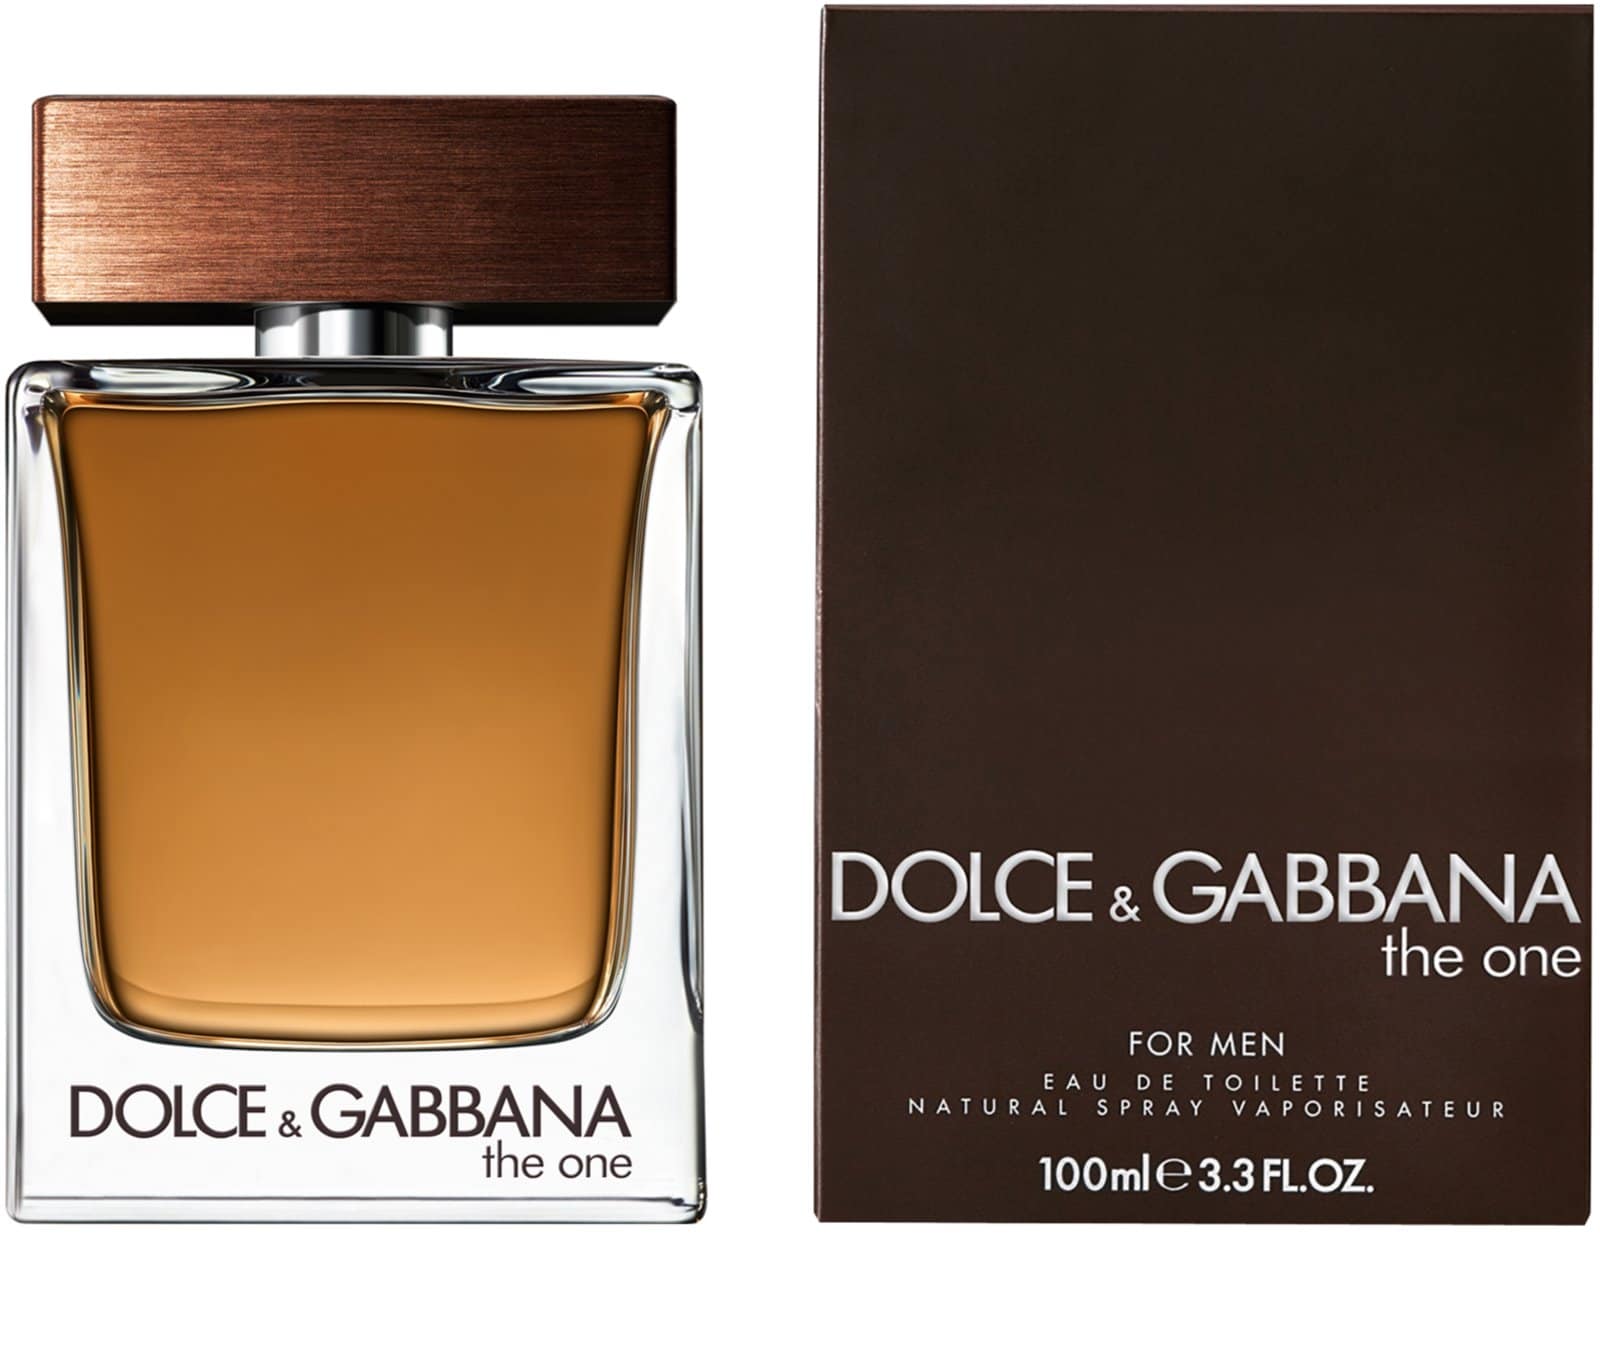 Dolce And Gabbana The One For Men Online Sellers, Save 65% | jlcatj.gob.mx